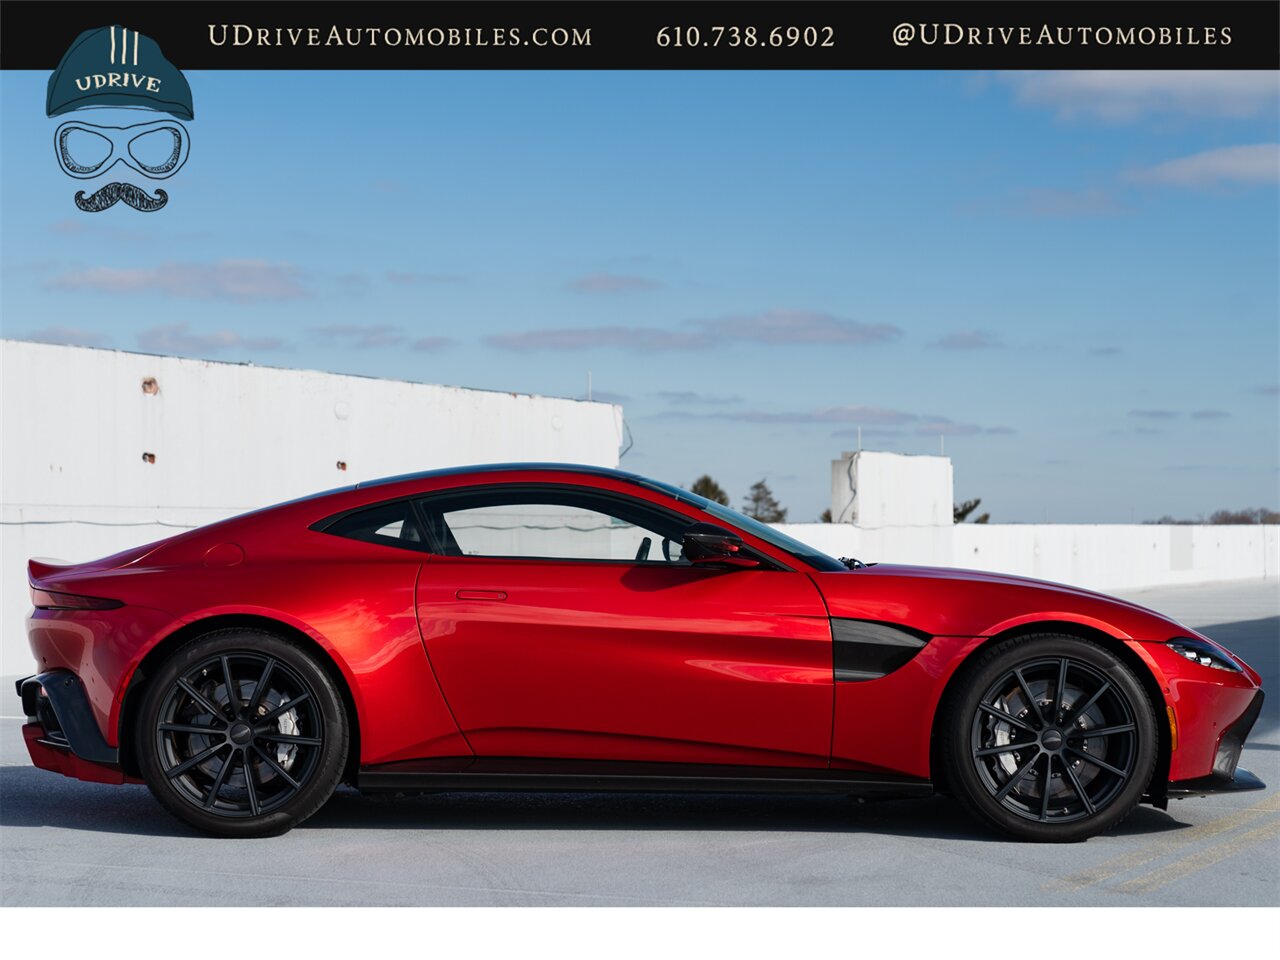 2019 Aston Martin Vantage  Incredibly Spec Rare Q Exclusive Fiamma Red $222k MSRP 1 of a Kind CPO - Photo 20 - West Chester, PA 19382